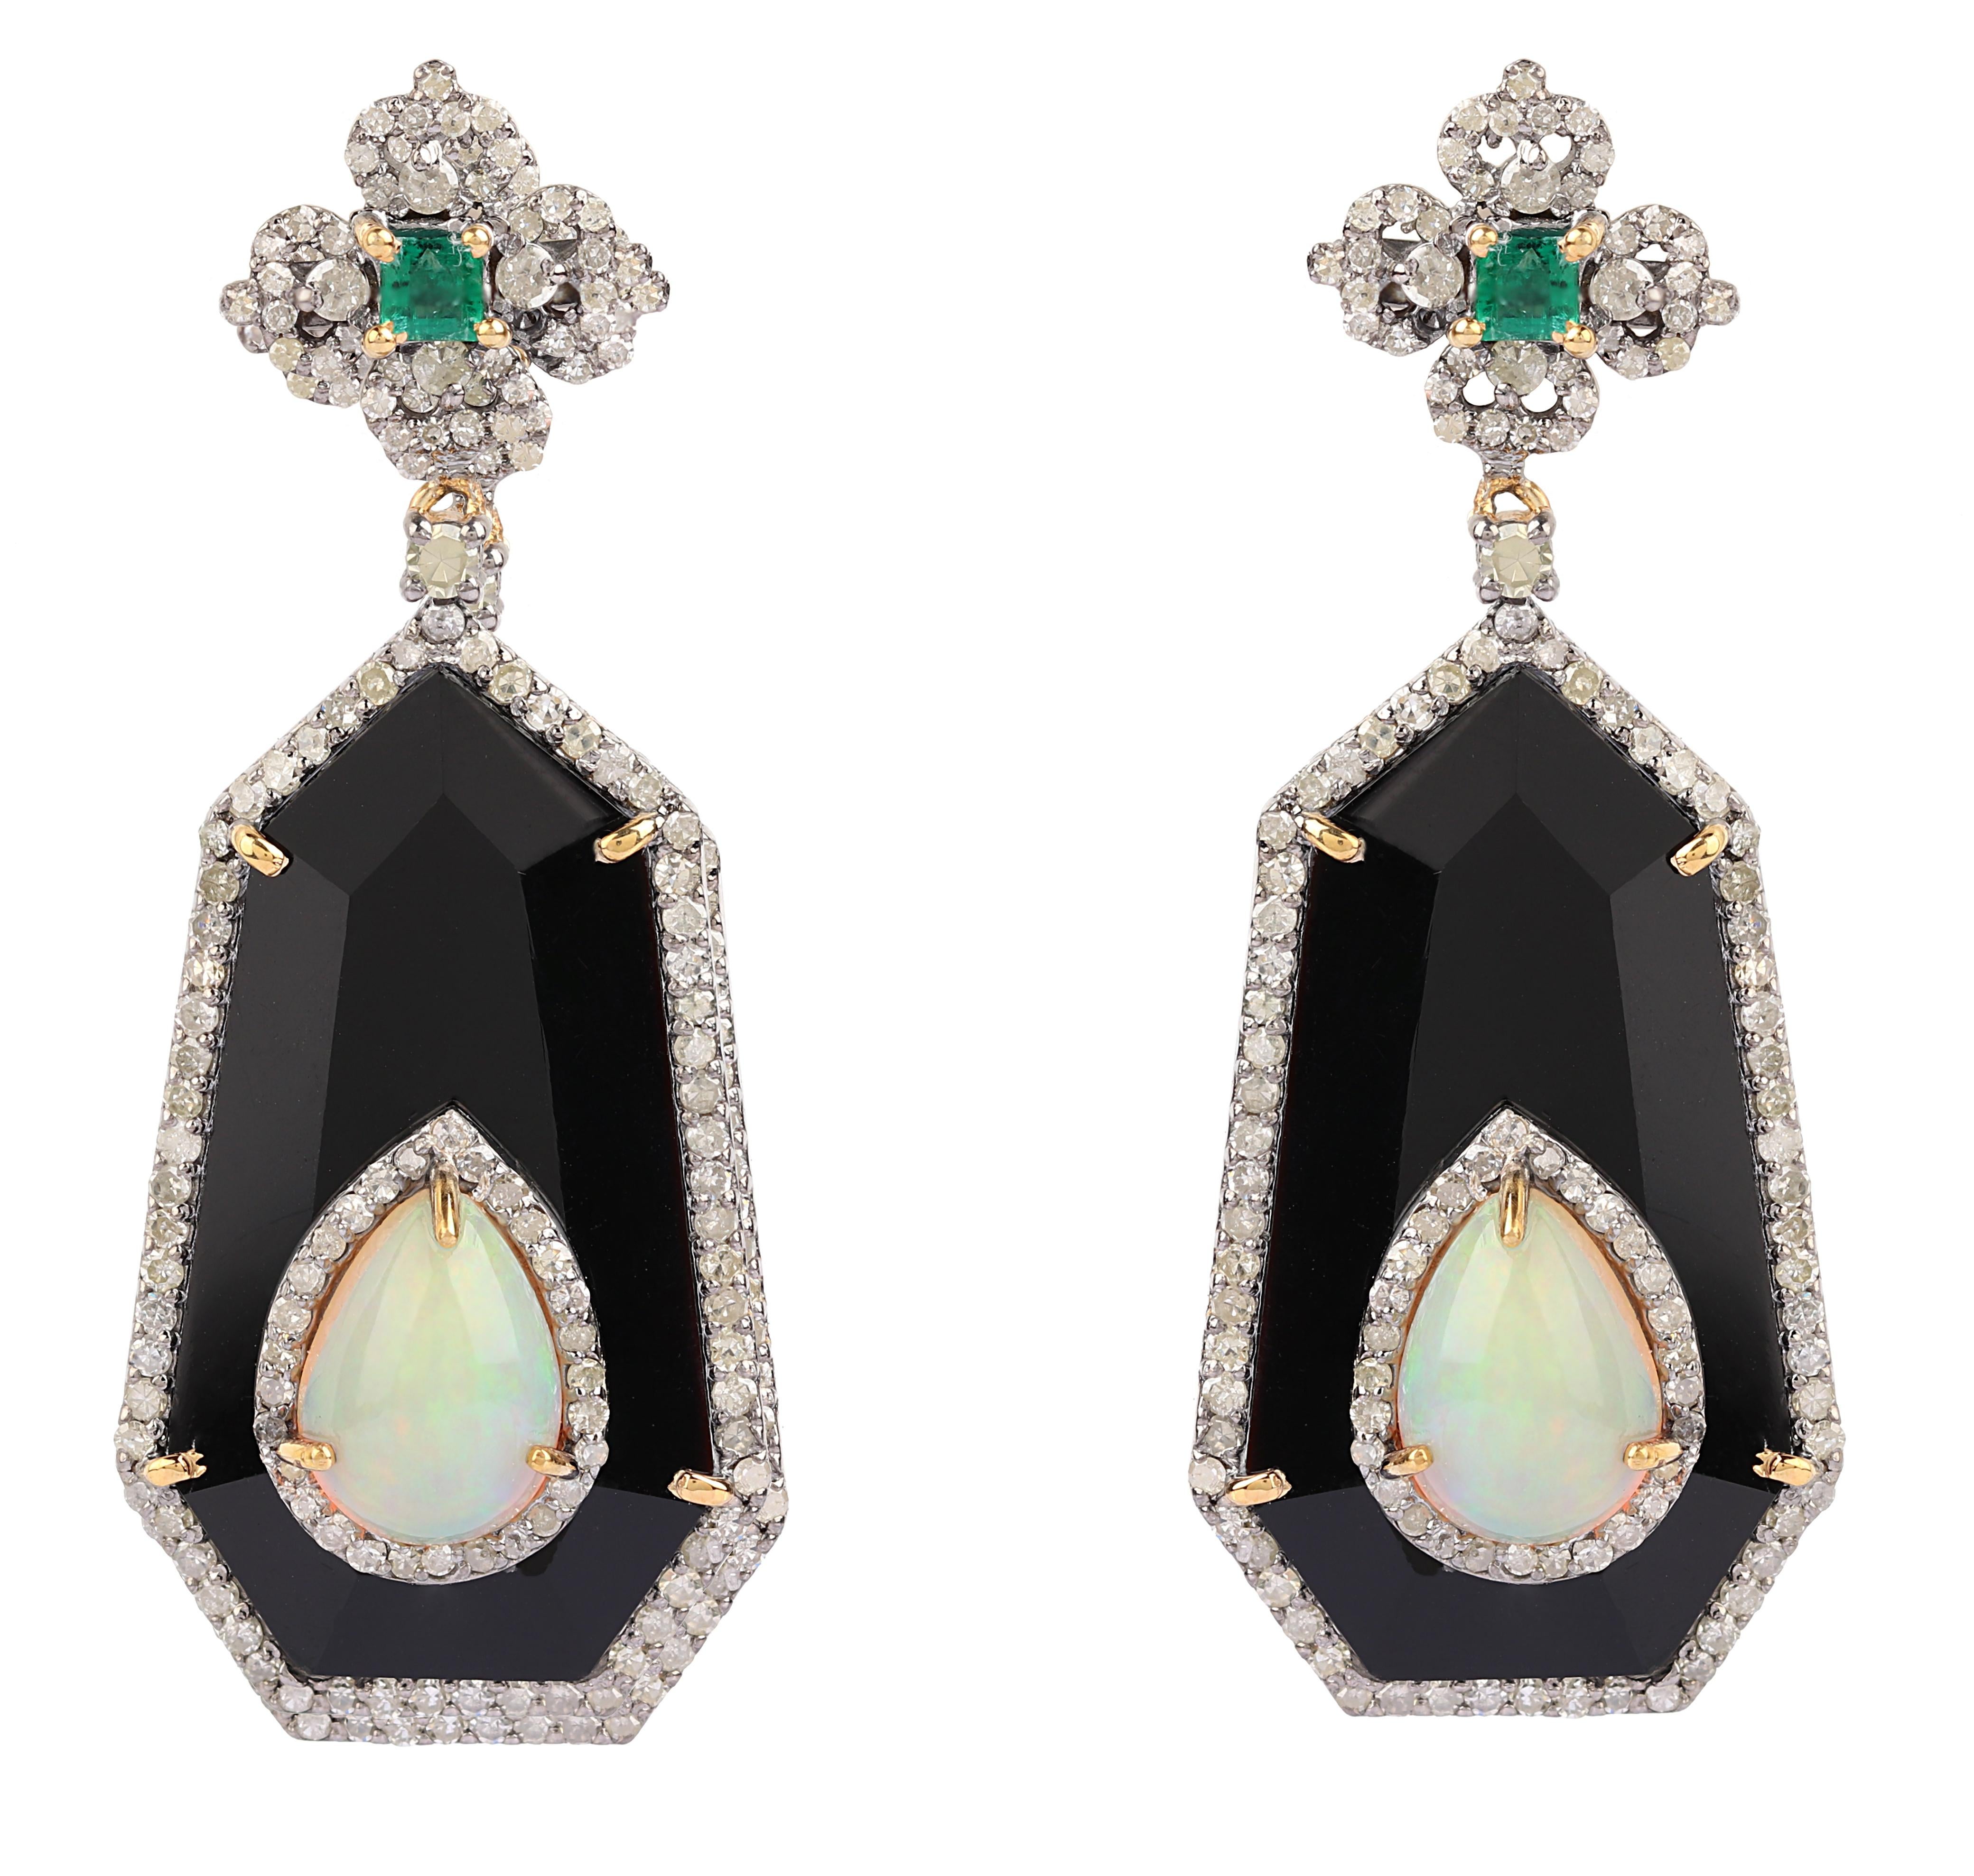 20.41 Carats Diamond, Emerald, Opal, and Onyx Drop Earrings in Art-Deco Style For Sale 1